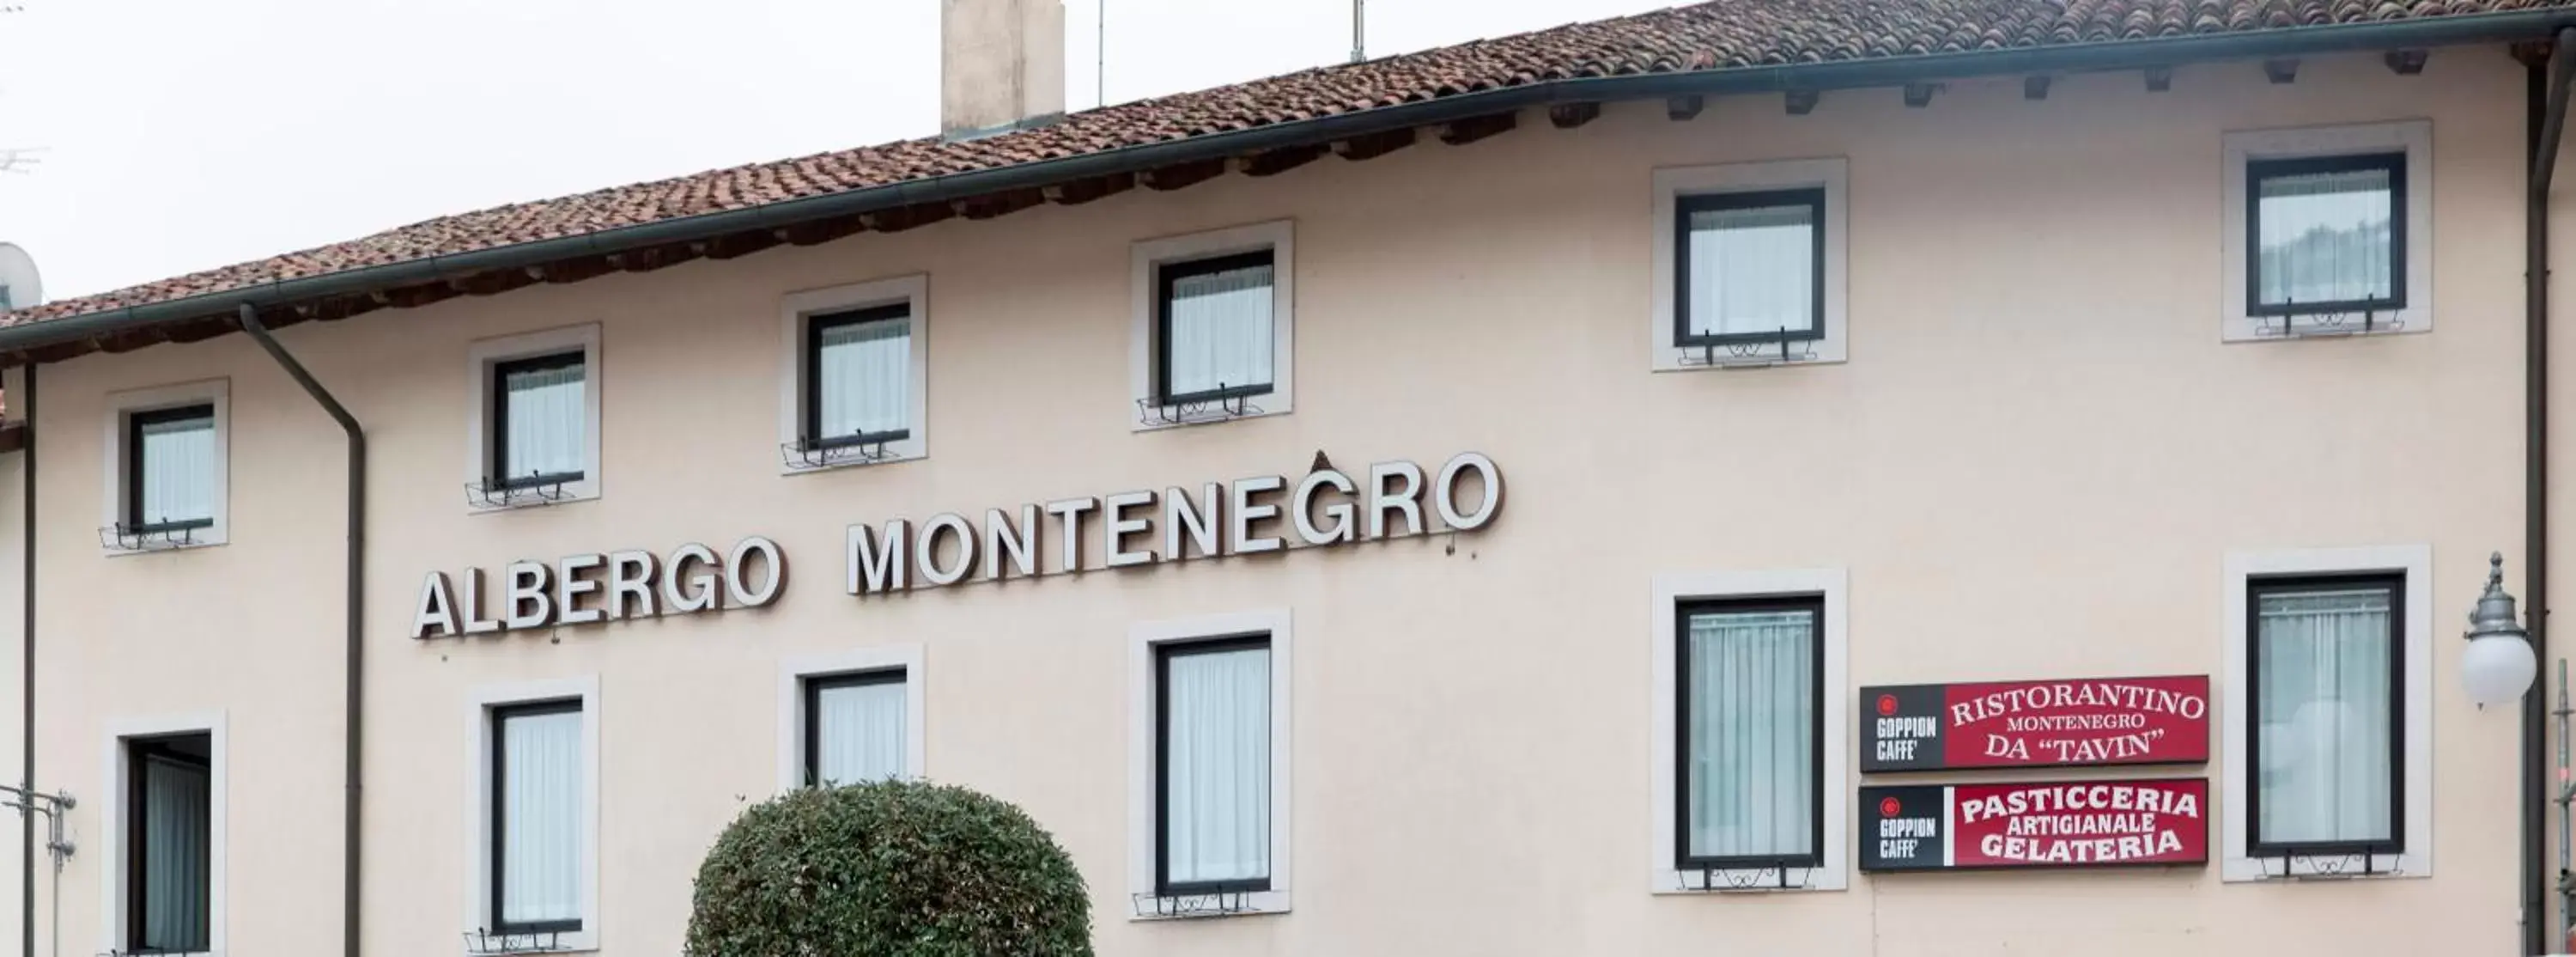 Property logo or sign, Property Building in Albergo Montenegro